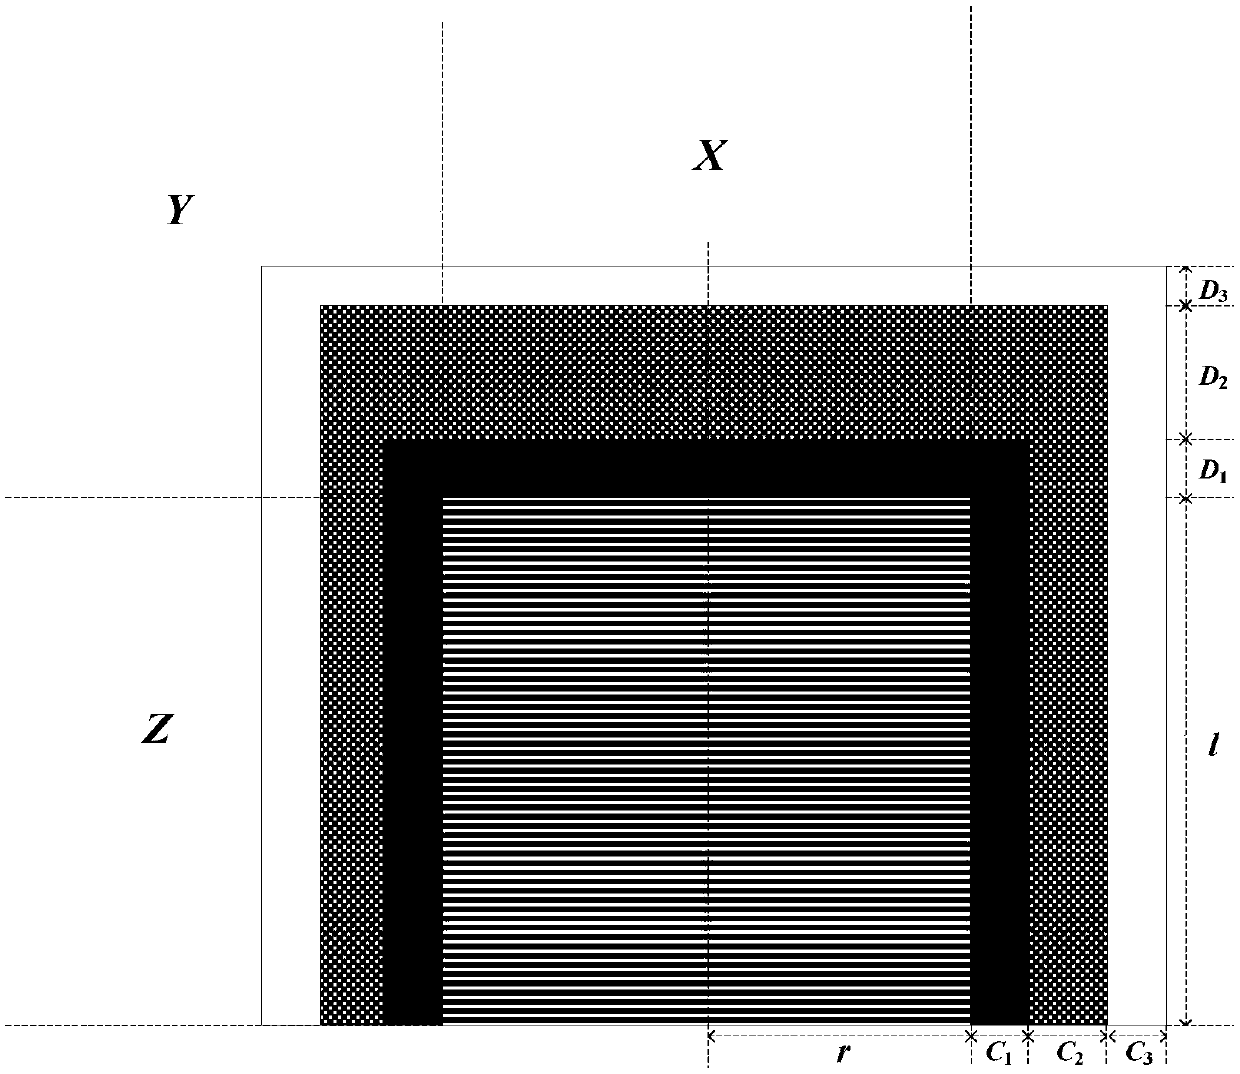 Method for acquiring source peak detection efficiency of cylindrical detector to point source